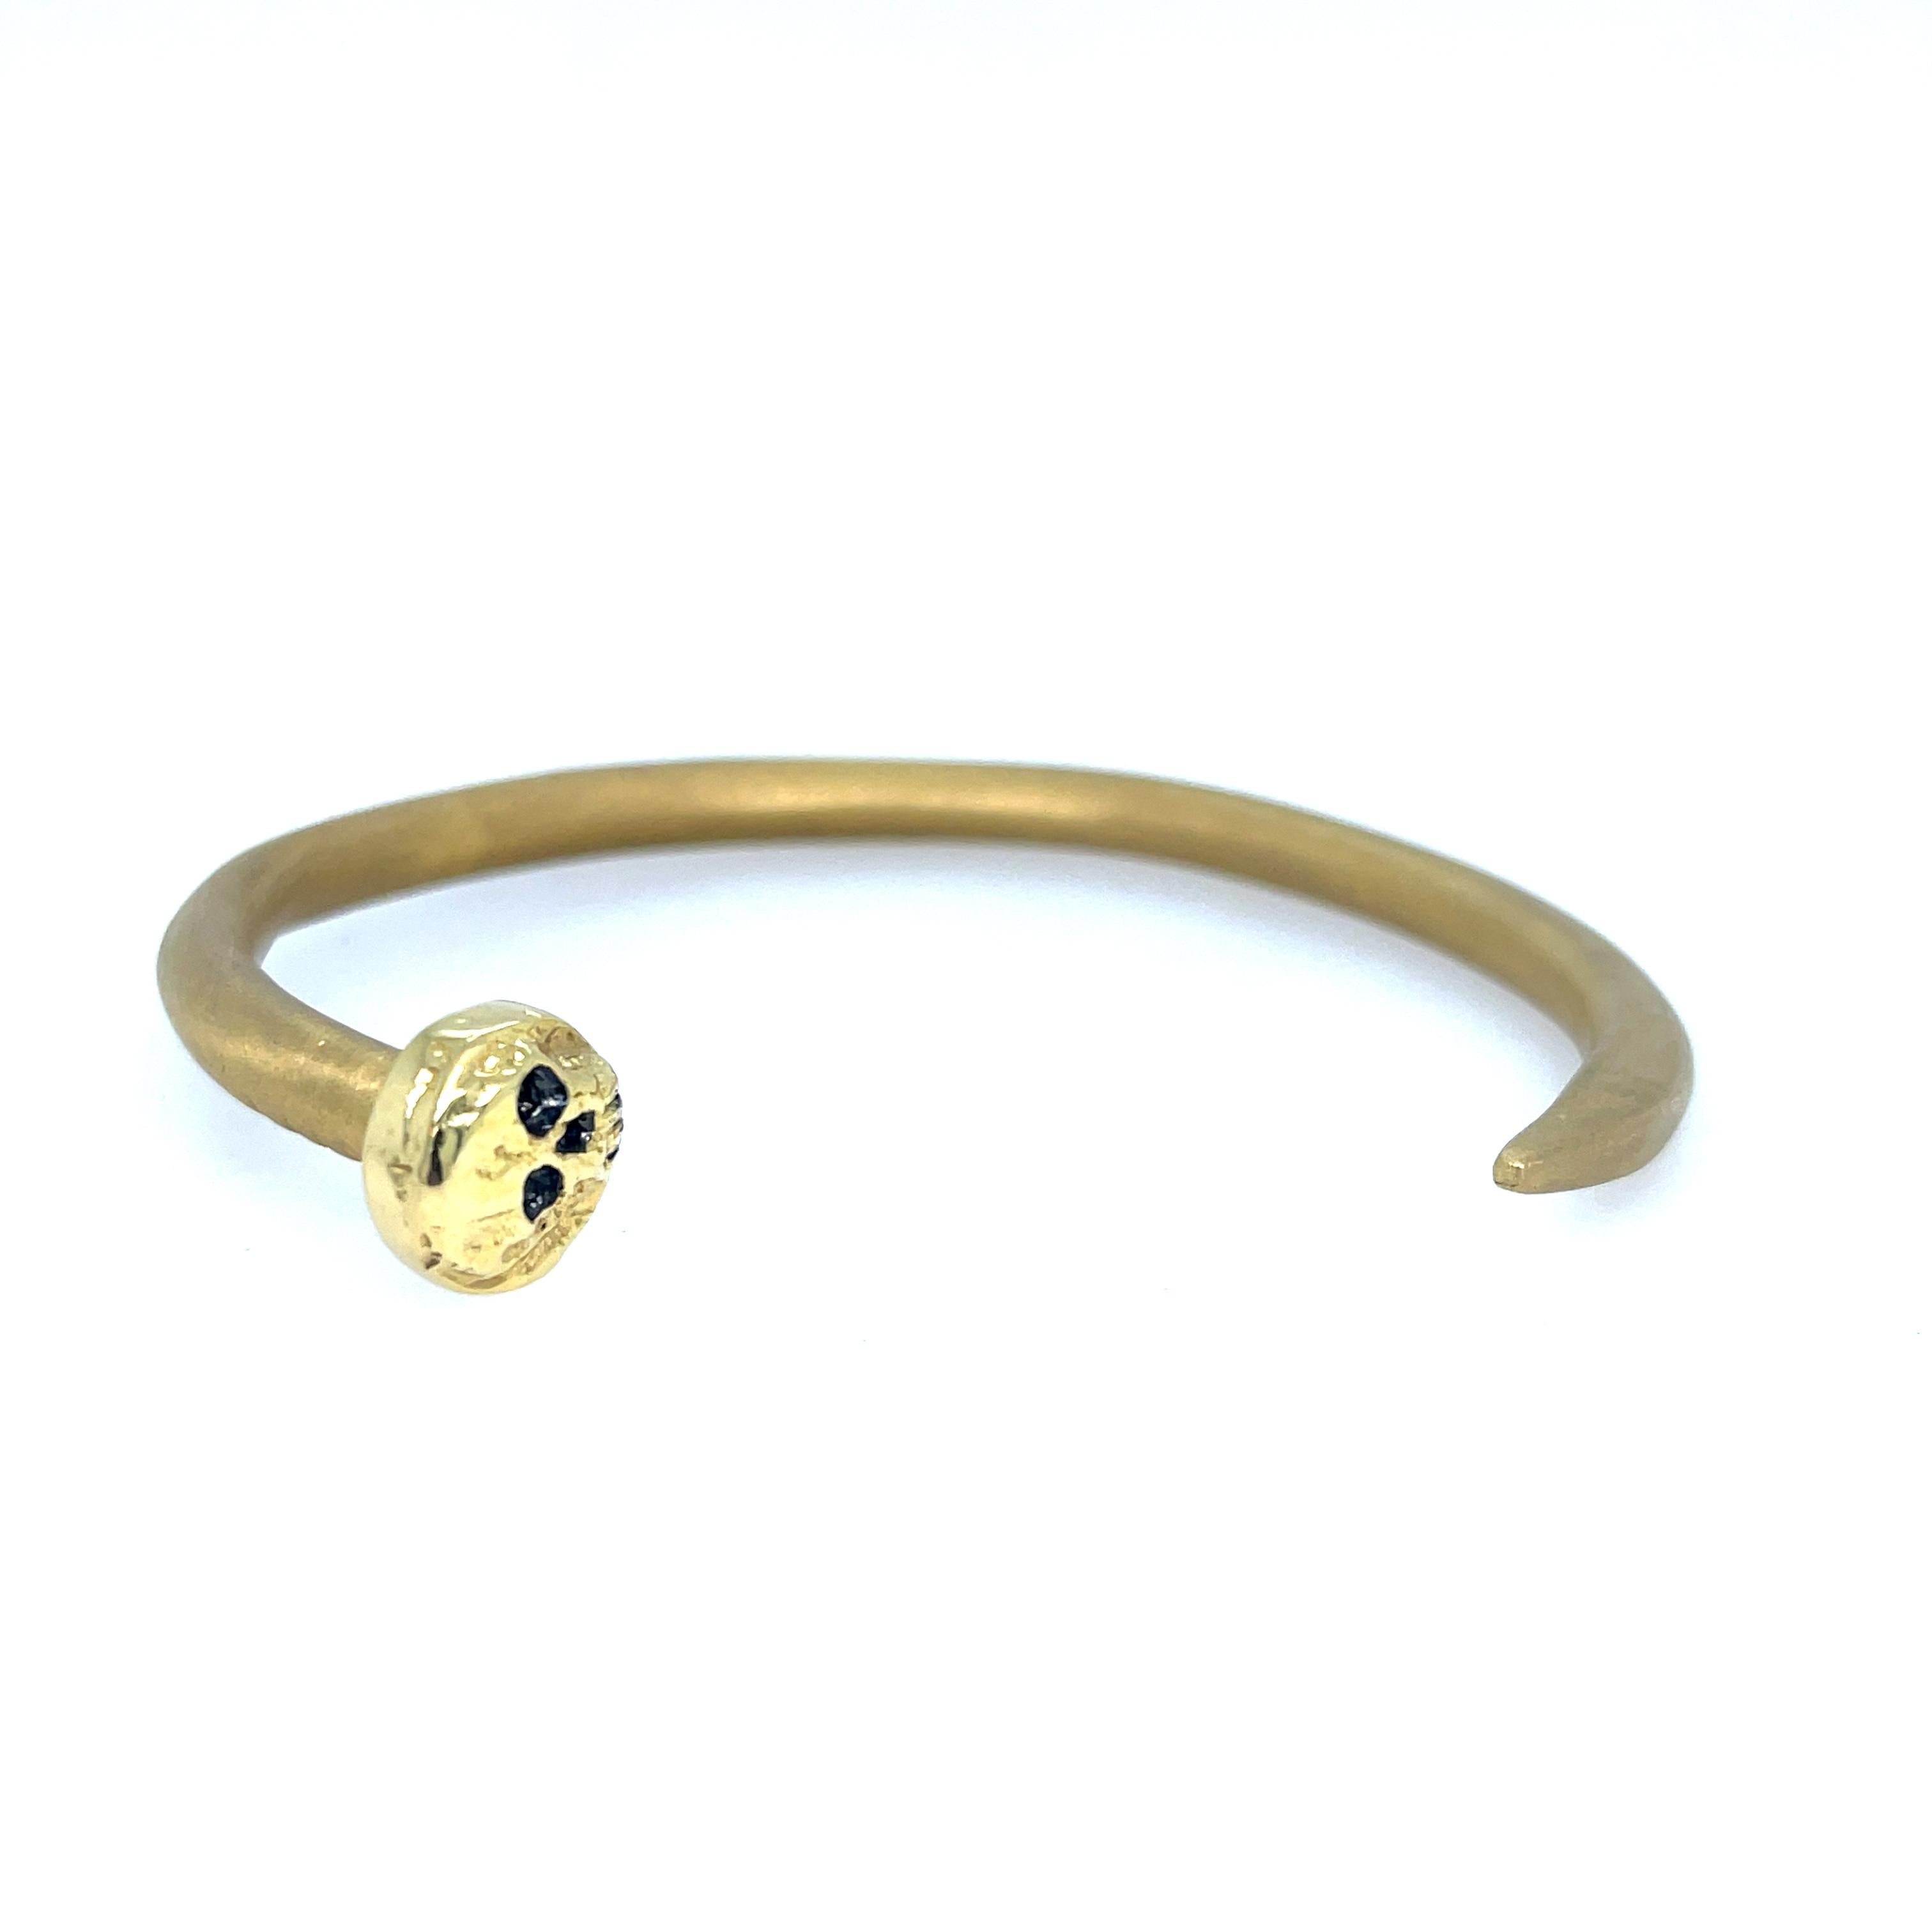 Skull and Nail 18k Yellow Gold Cuff. 

0.20 wide
2.25